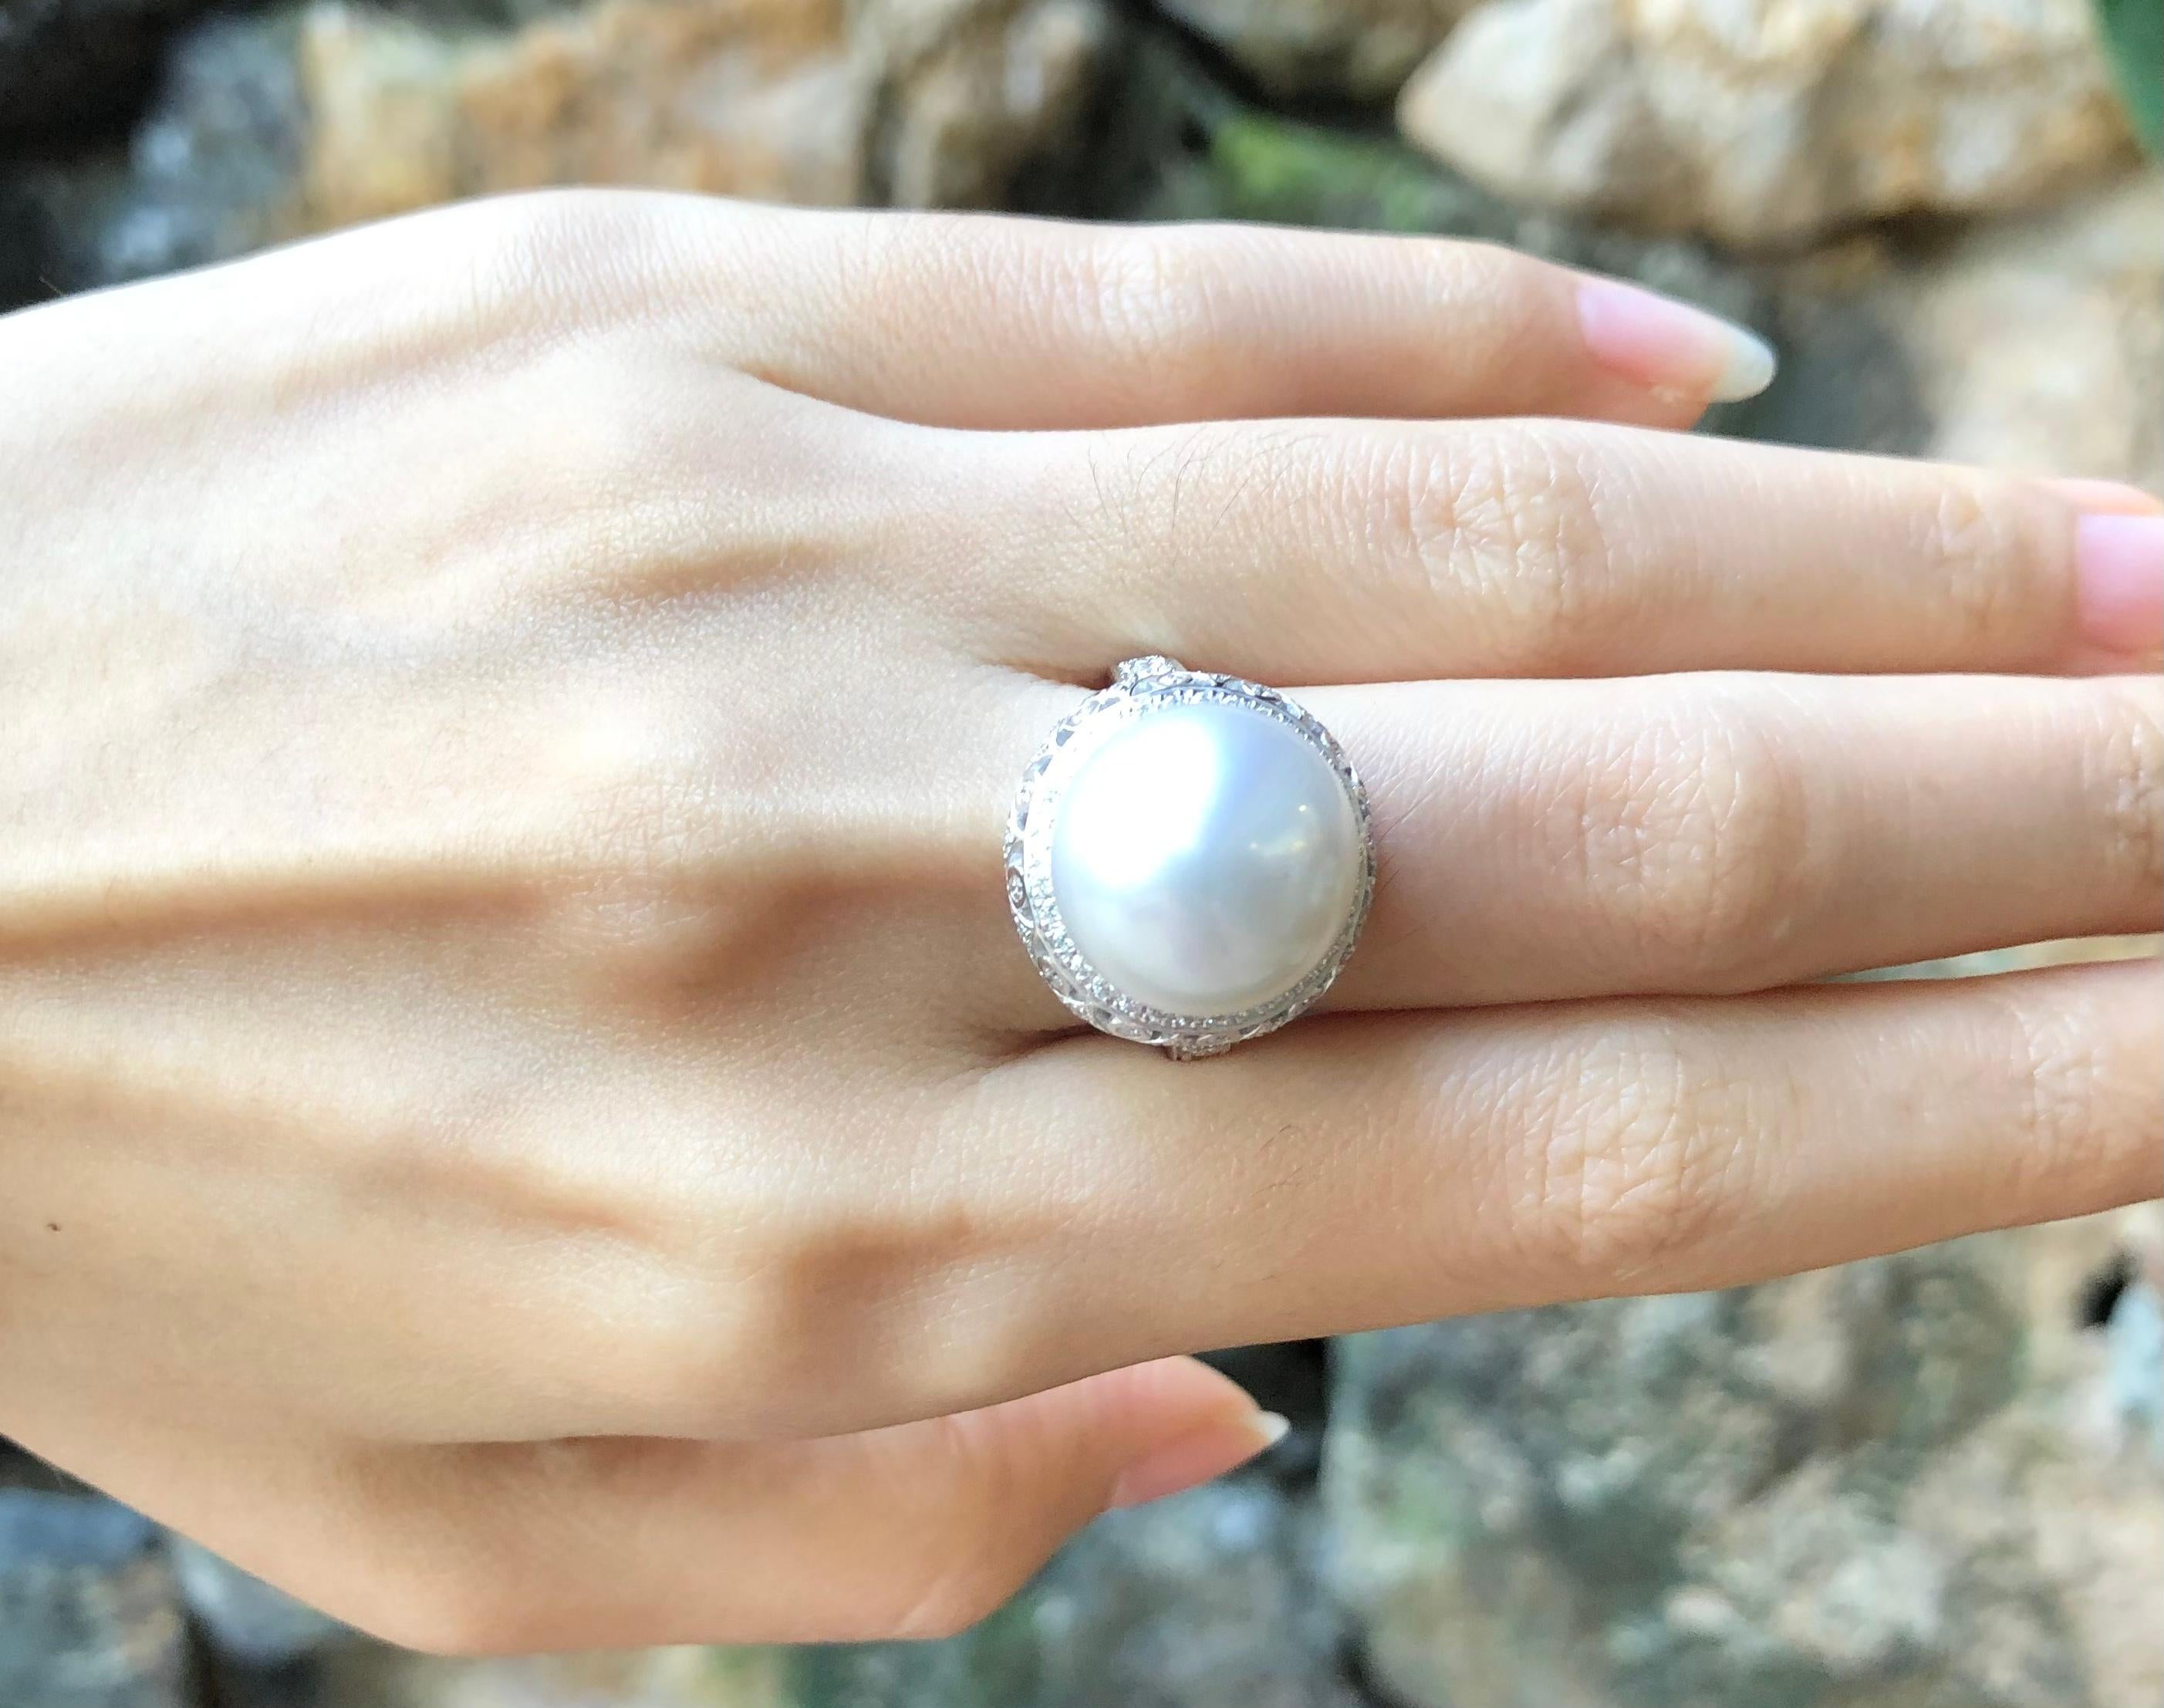 South Sea Pearl with Diamond 0.86 carat Ring set in 18 Karat White Gold Settings

Width:  1.8 cm 
Length: 1.8 cm
Ring Size: 54
Total Weight: 12.99 grams

South Sea Pearl: 14 mm

